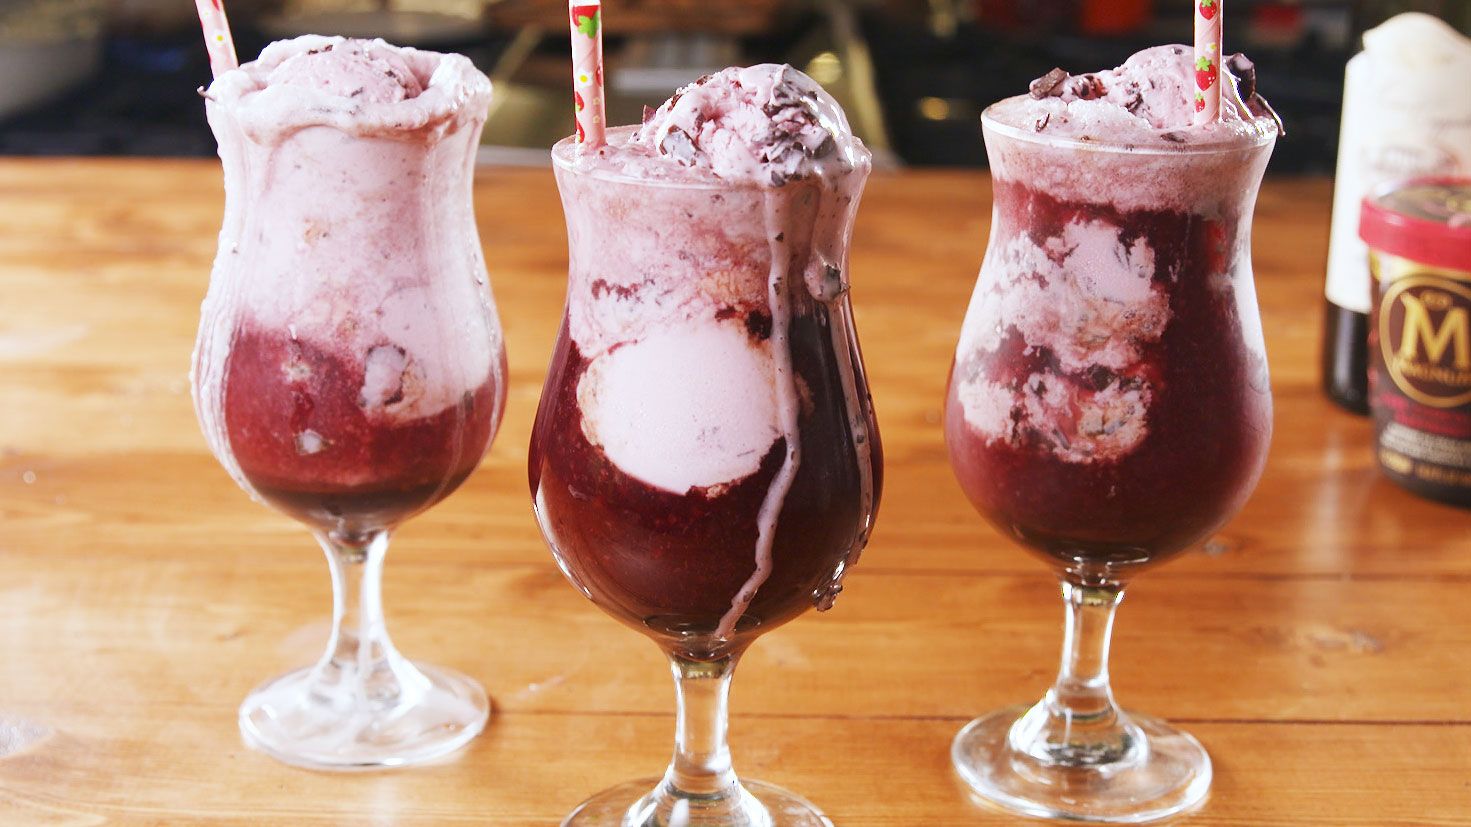 Best Red Wine Floats Recipe - How to Make Red Wine Floats